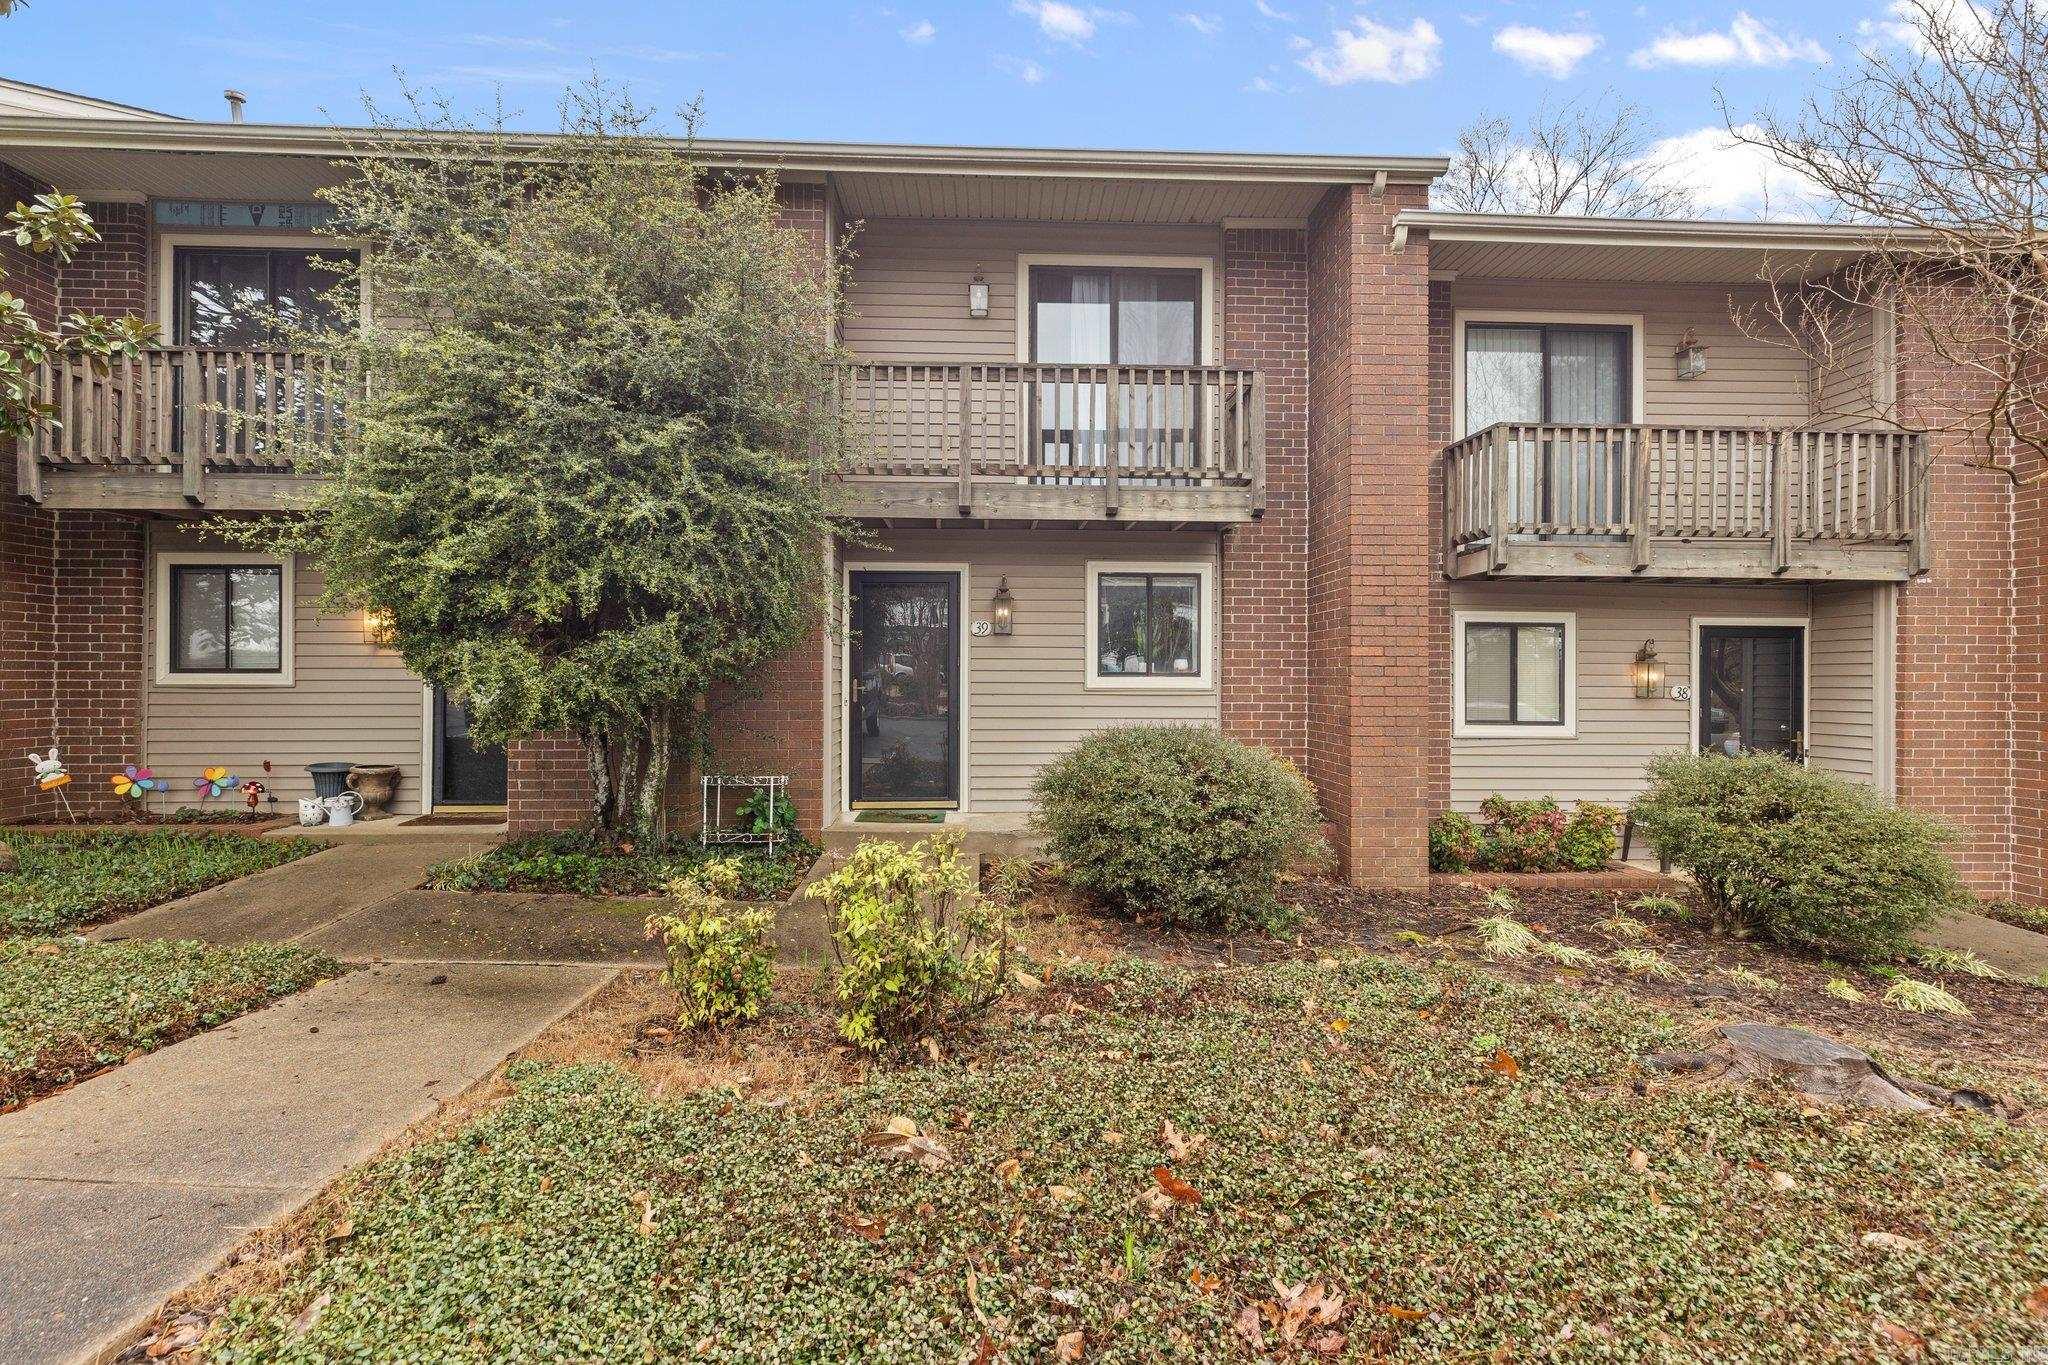 View Little Rock, AR 72227 townhome